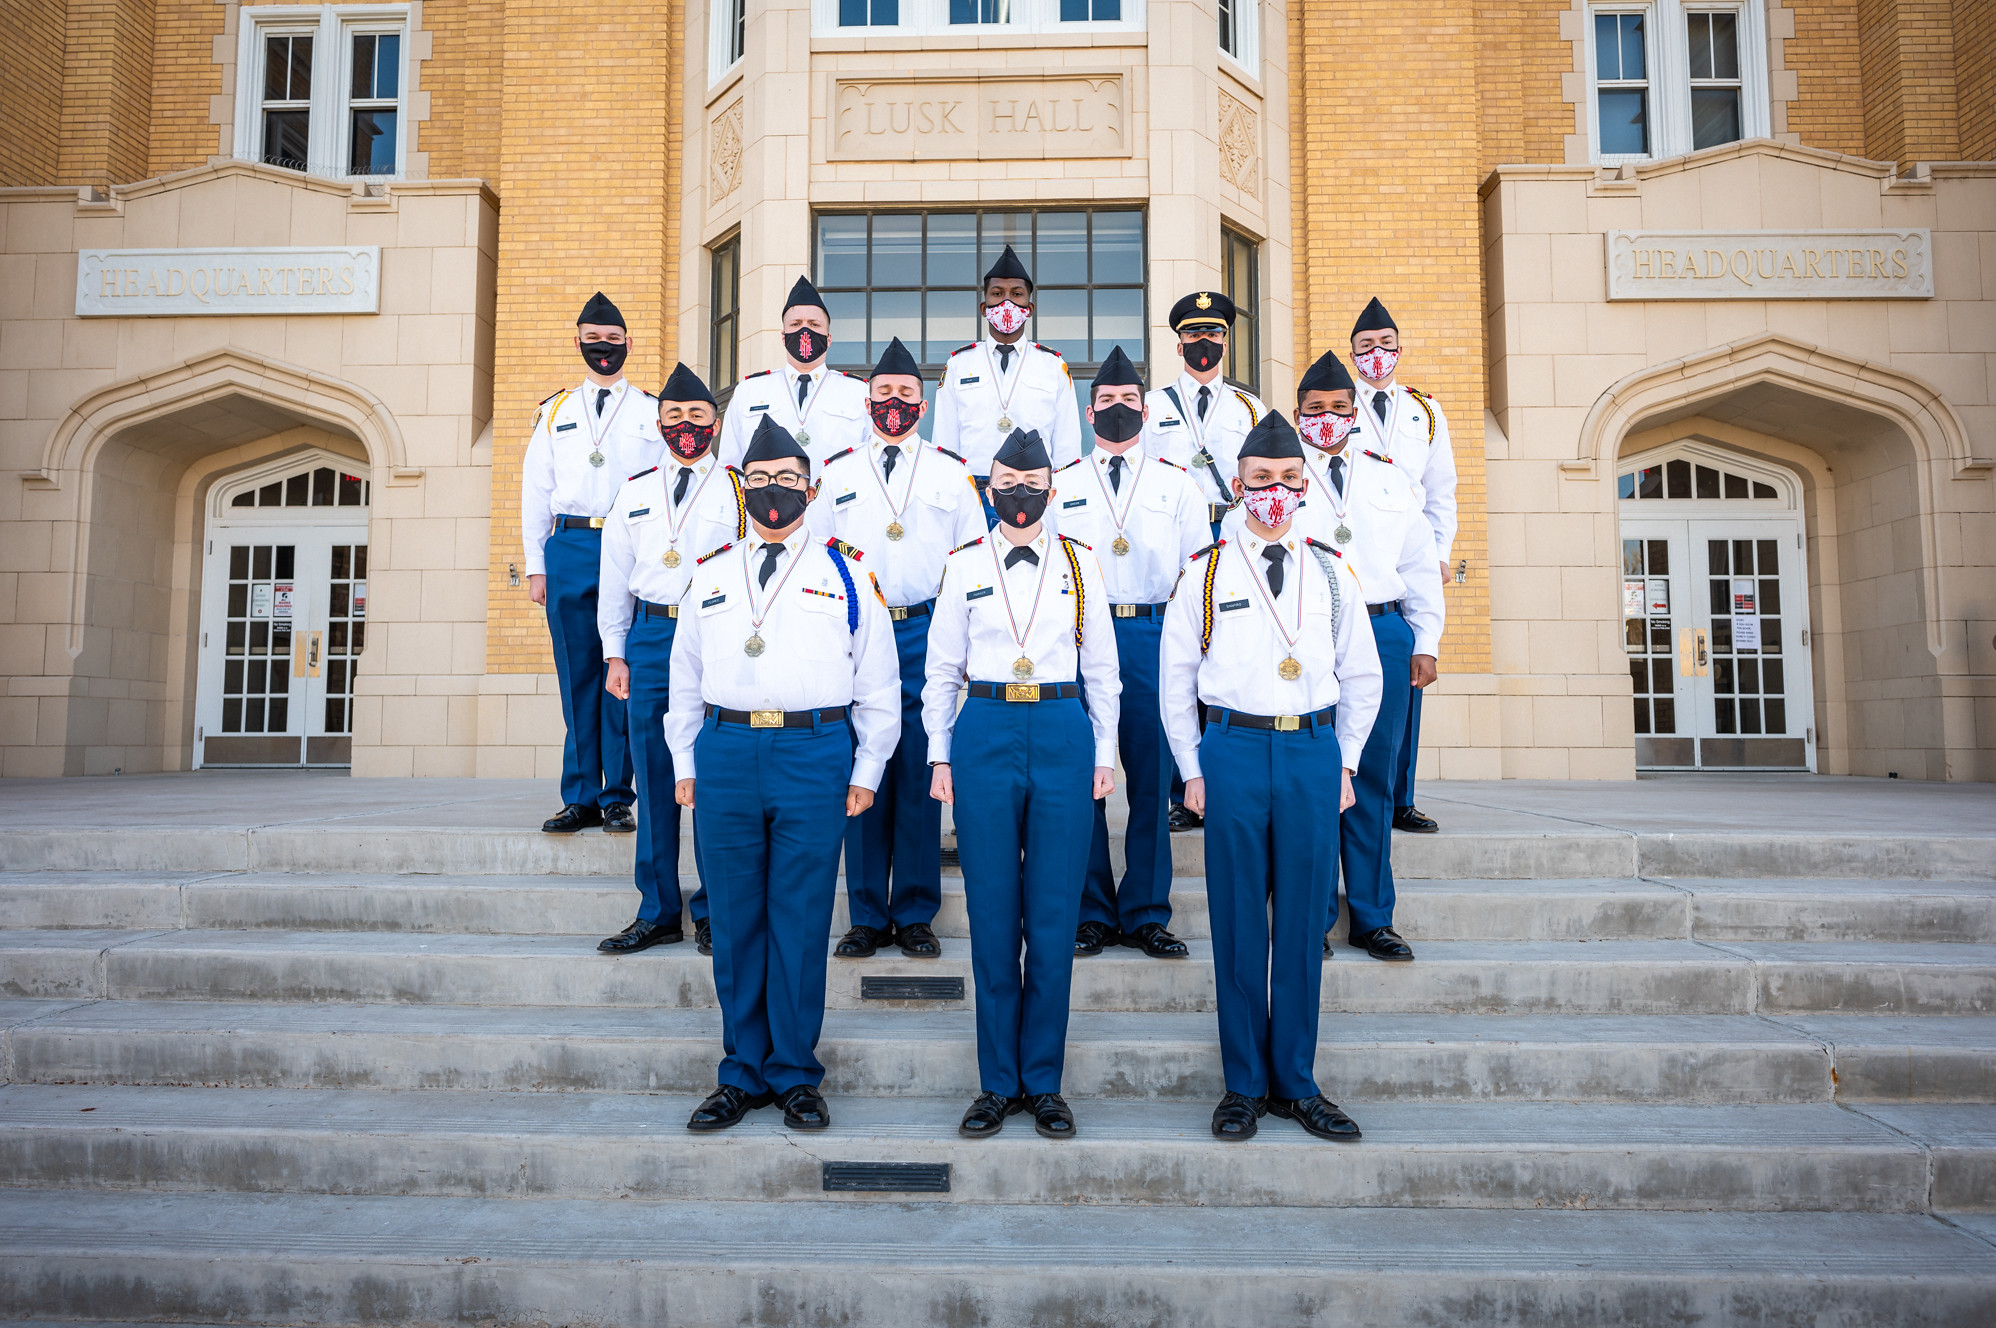 New Mexico Military Institute - #NMMI one family. #repost